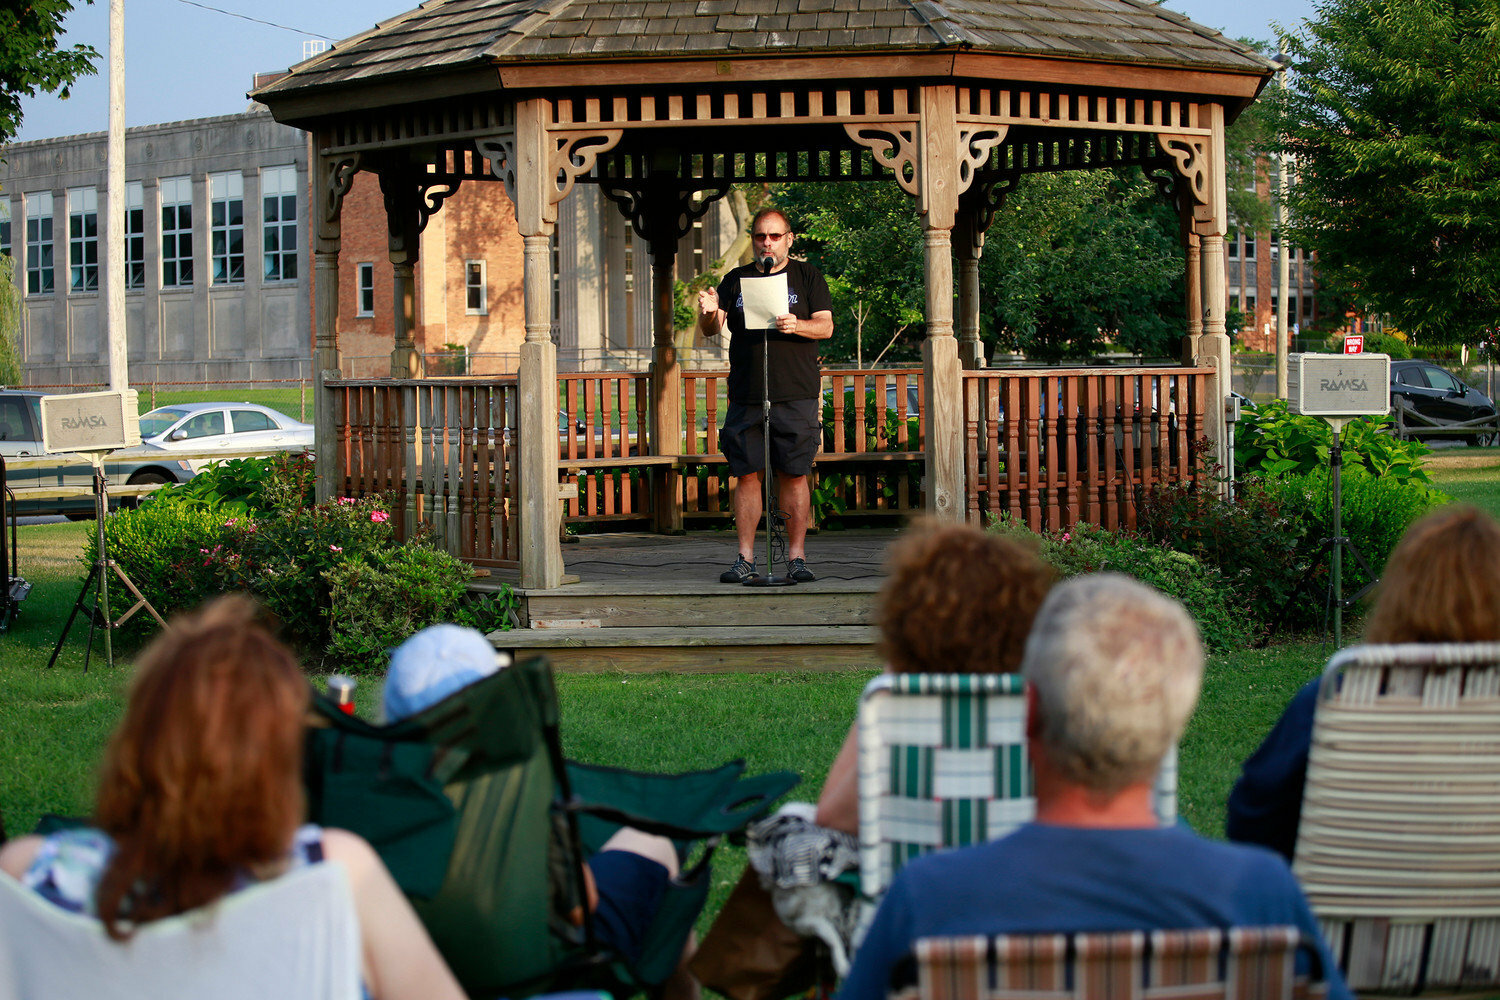 At a previous gazebo summer reading in 2021, Freeport resident Lloyd Abrams entertained the crowd with his poetry.